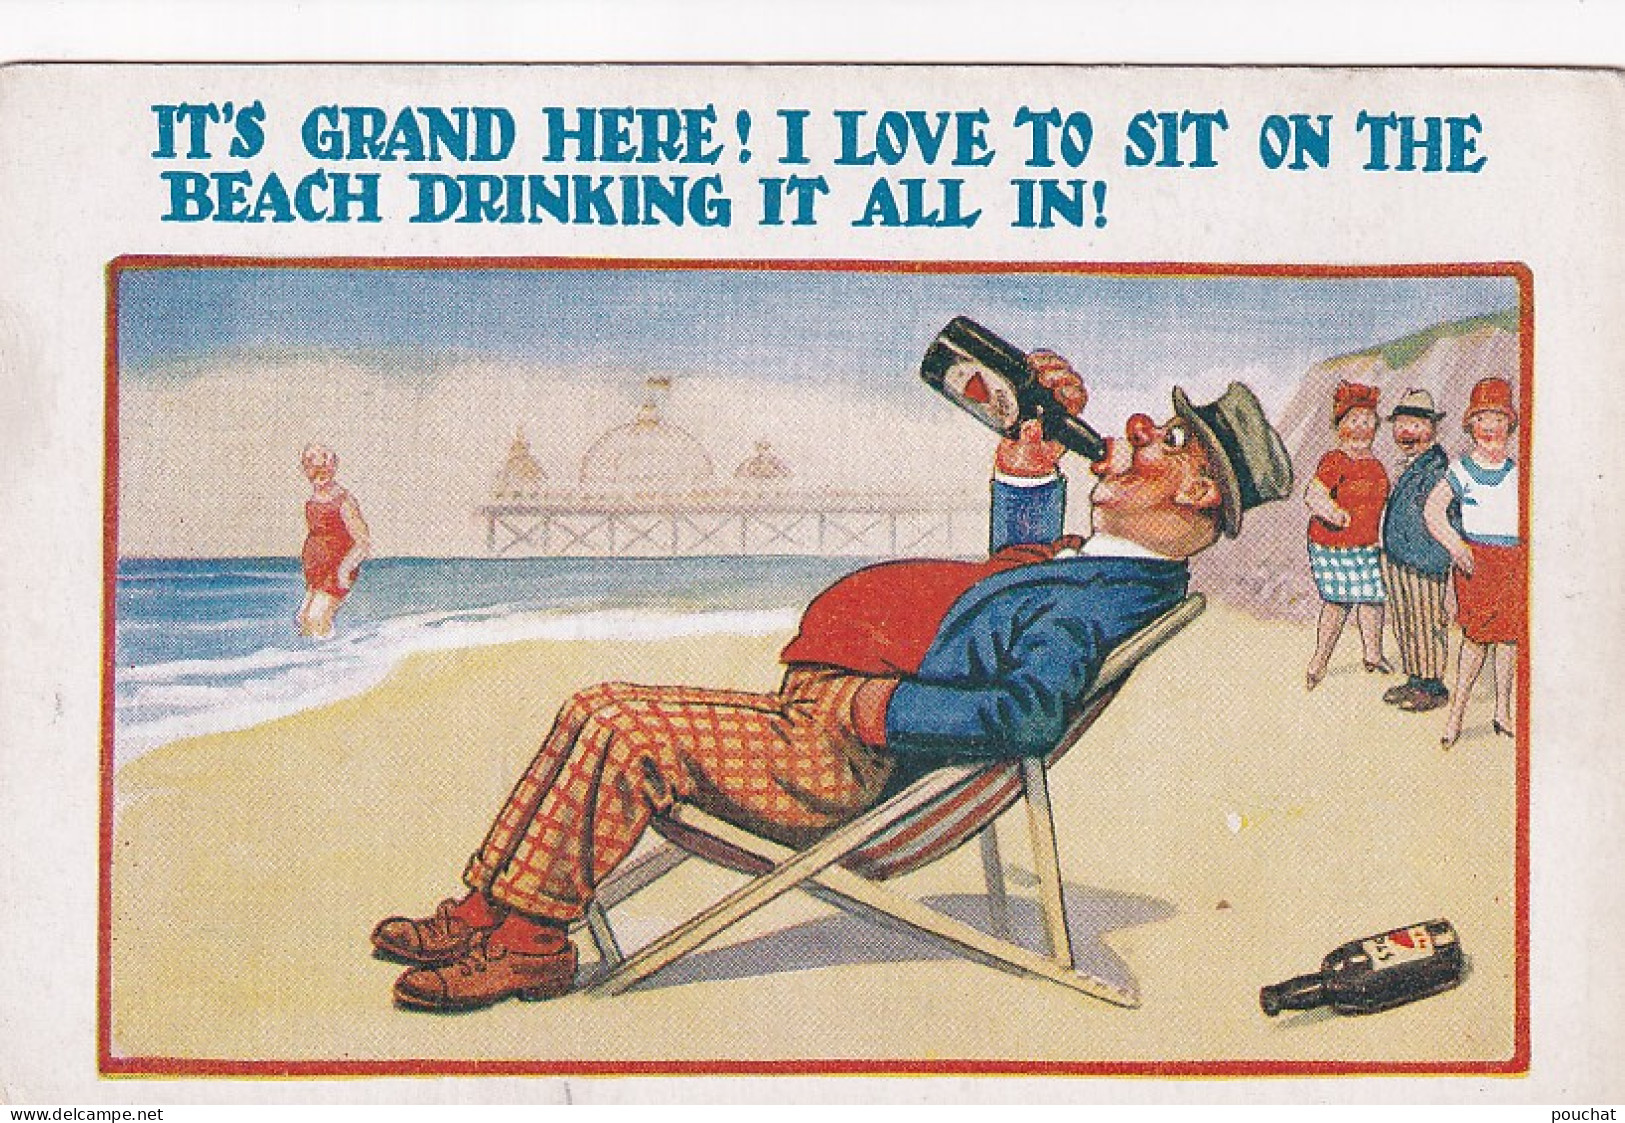 UR Nw45- IT'S GRAND HERE ! I LOVE TO SIT ON THE BEACH DRINKING IT ALL IN - HOMME BUVANT SUR LA PLAGE - ILLUSTRATEUR - Humor